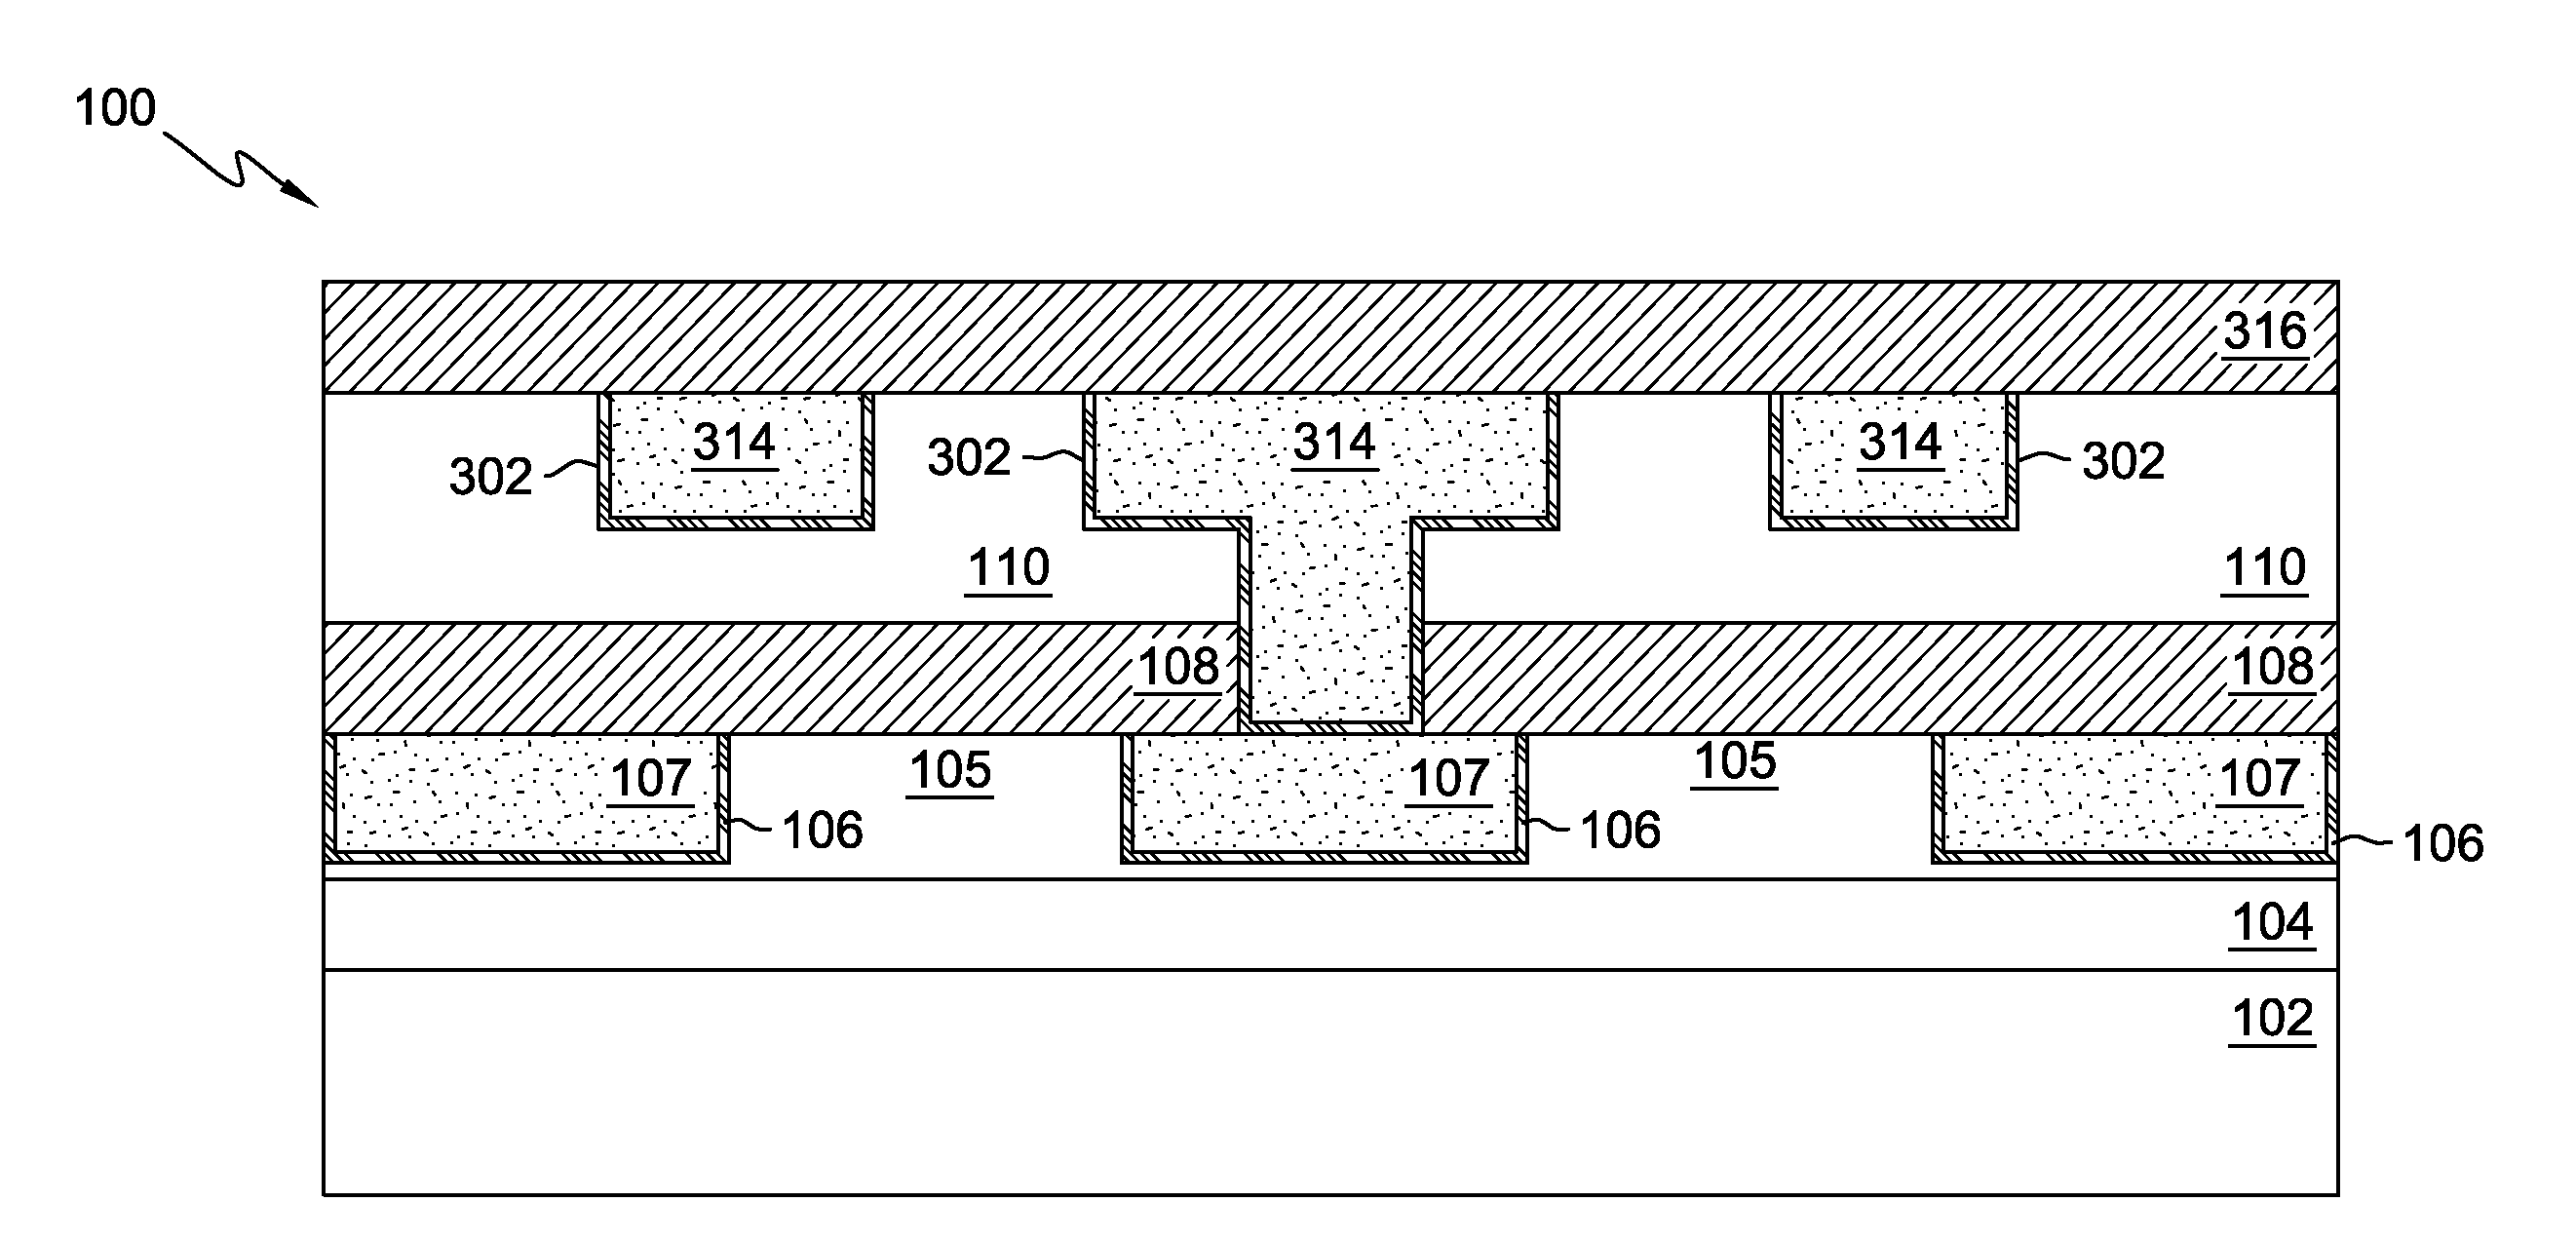 Semiconductor interconnect structure having a graphene-based barrier metal layer